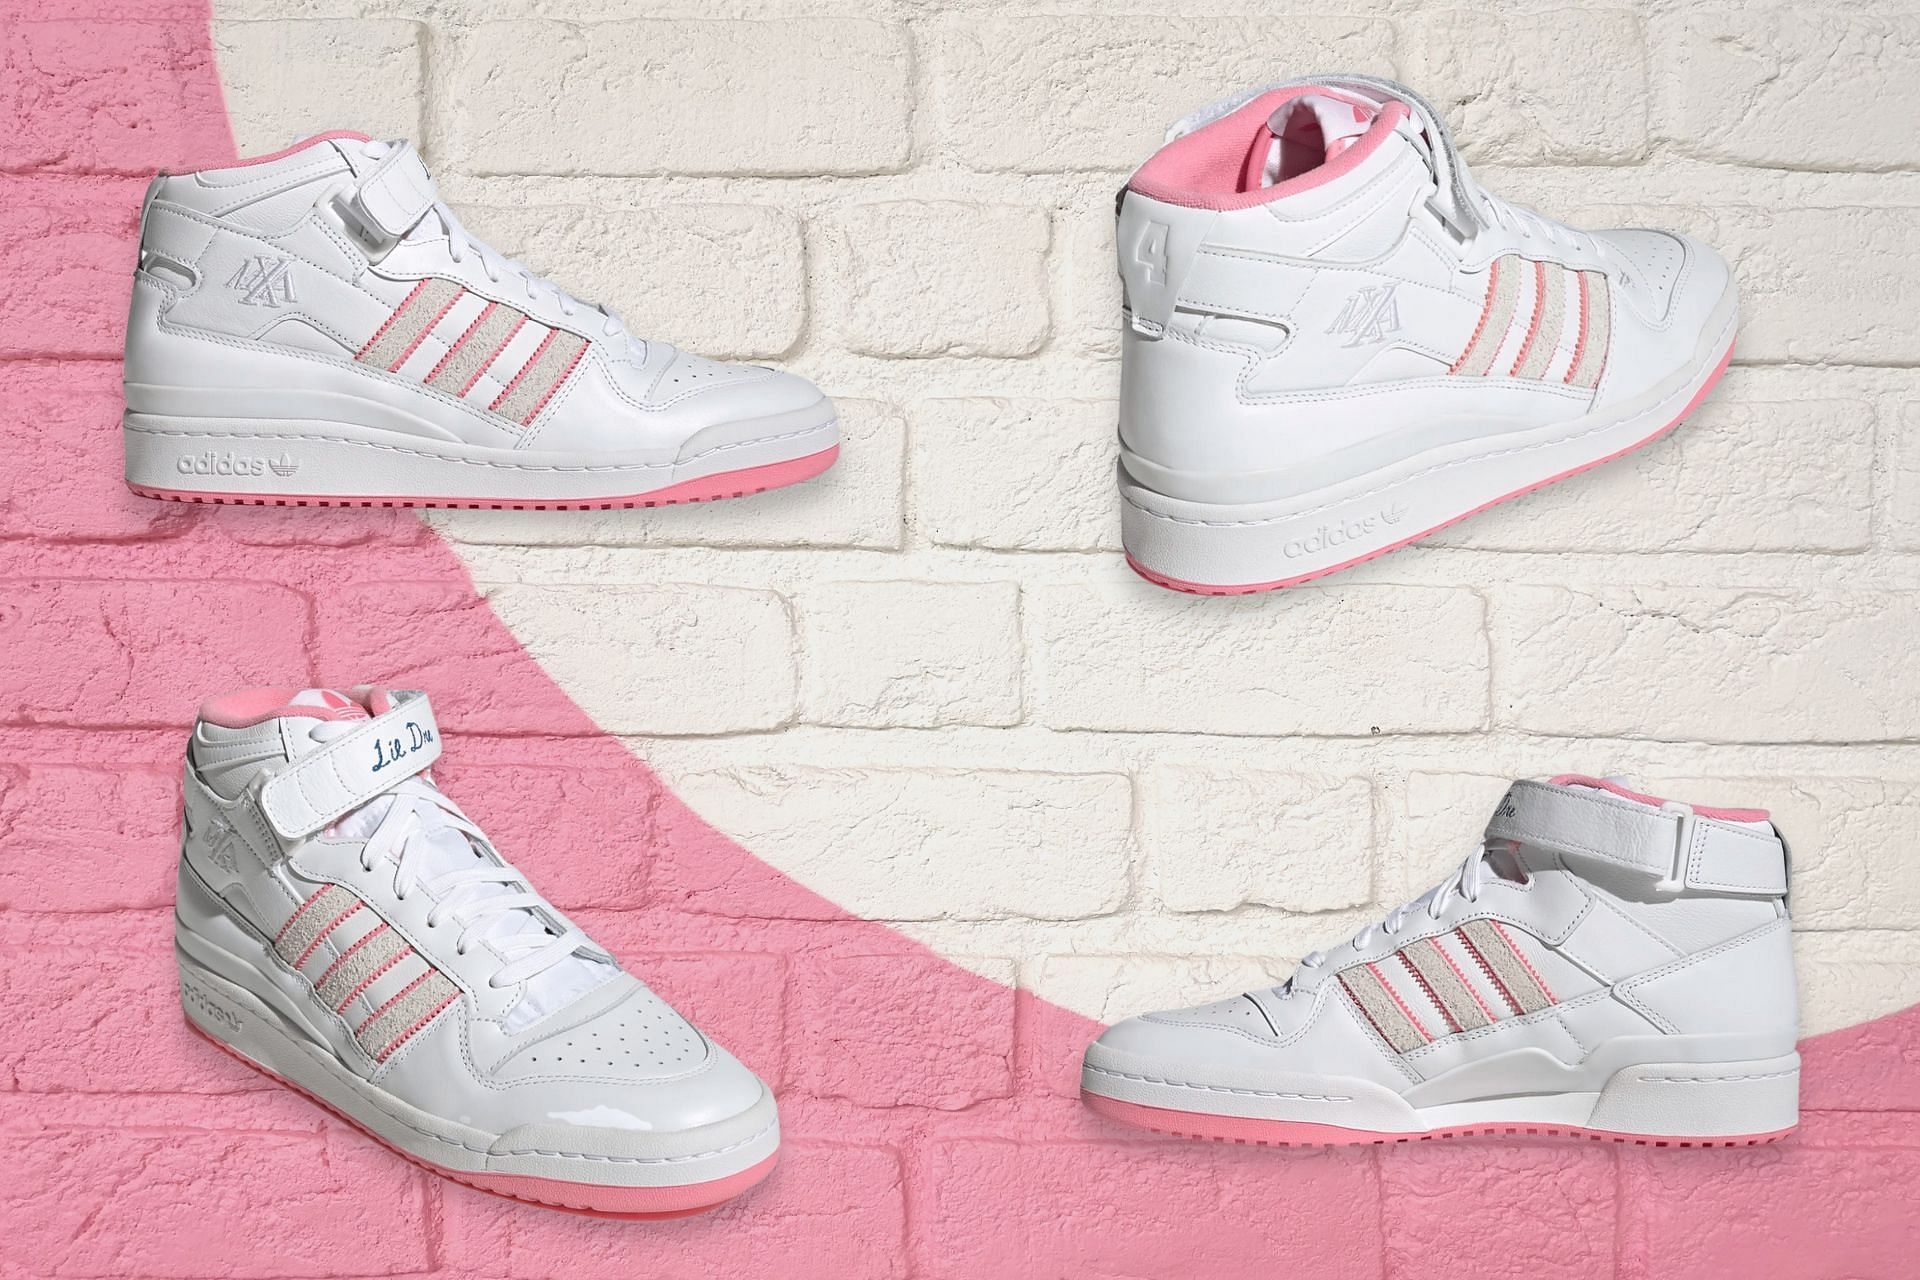 Newly launched Adidas Originals x Dre Forum 84 Mid ADV sneakers as a part of the Maxallure x Adidas &quot;Think Beautiful Thoughts&quot; collection (Image via Sportskeeda)